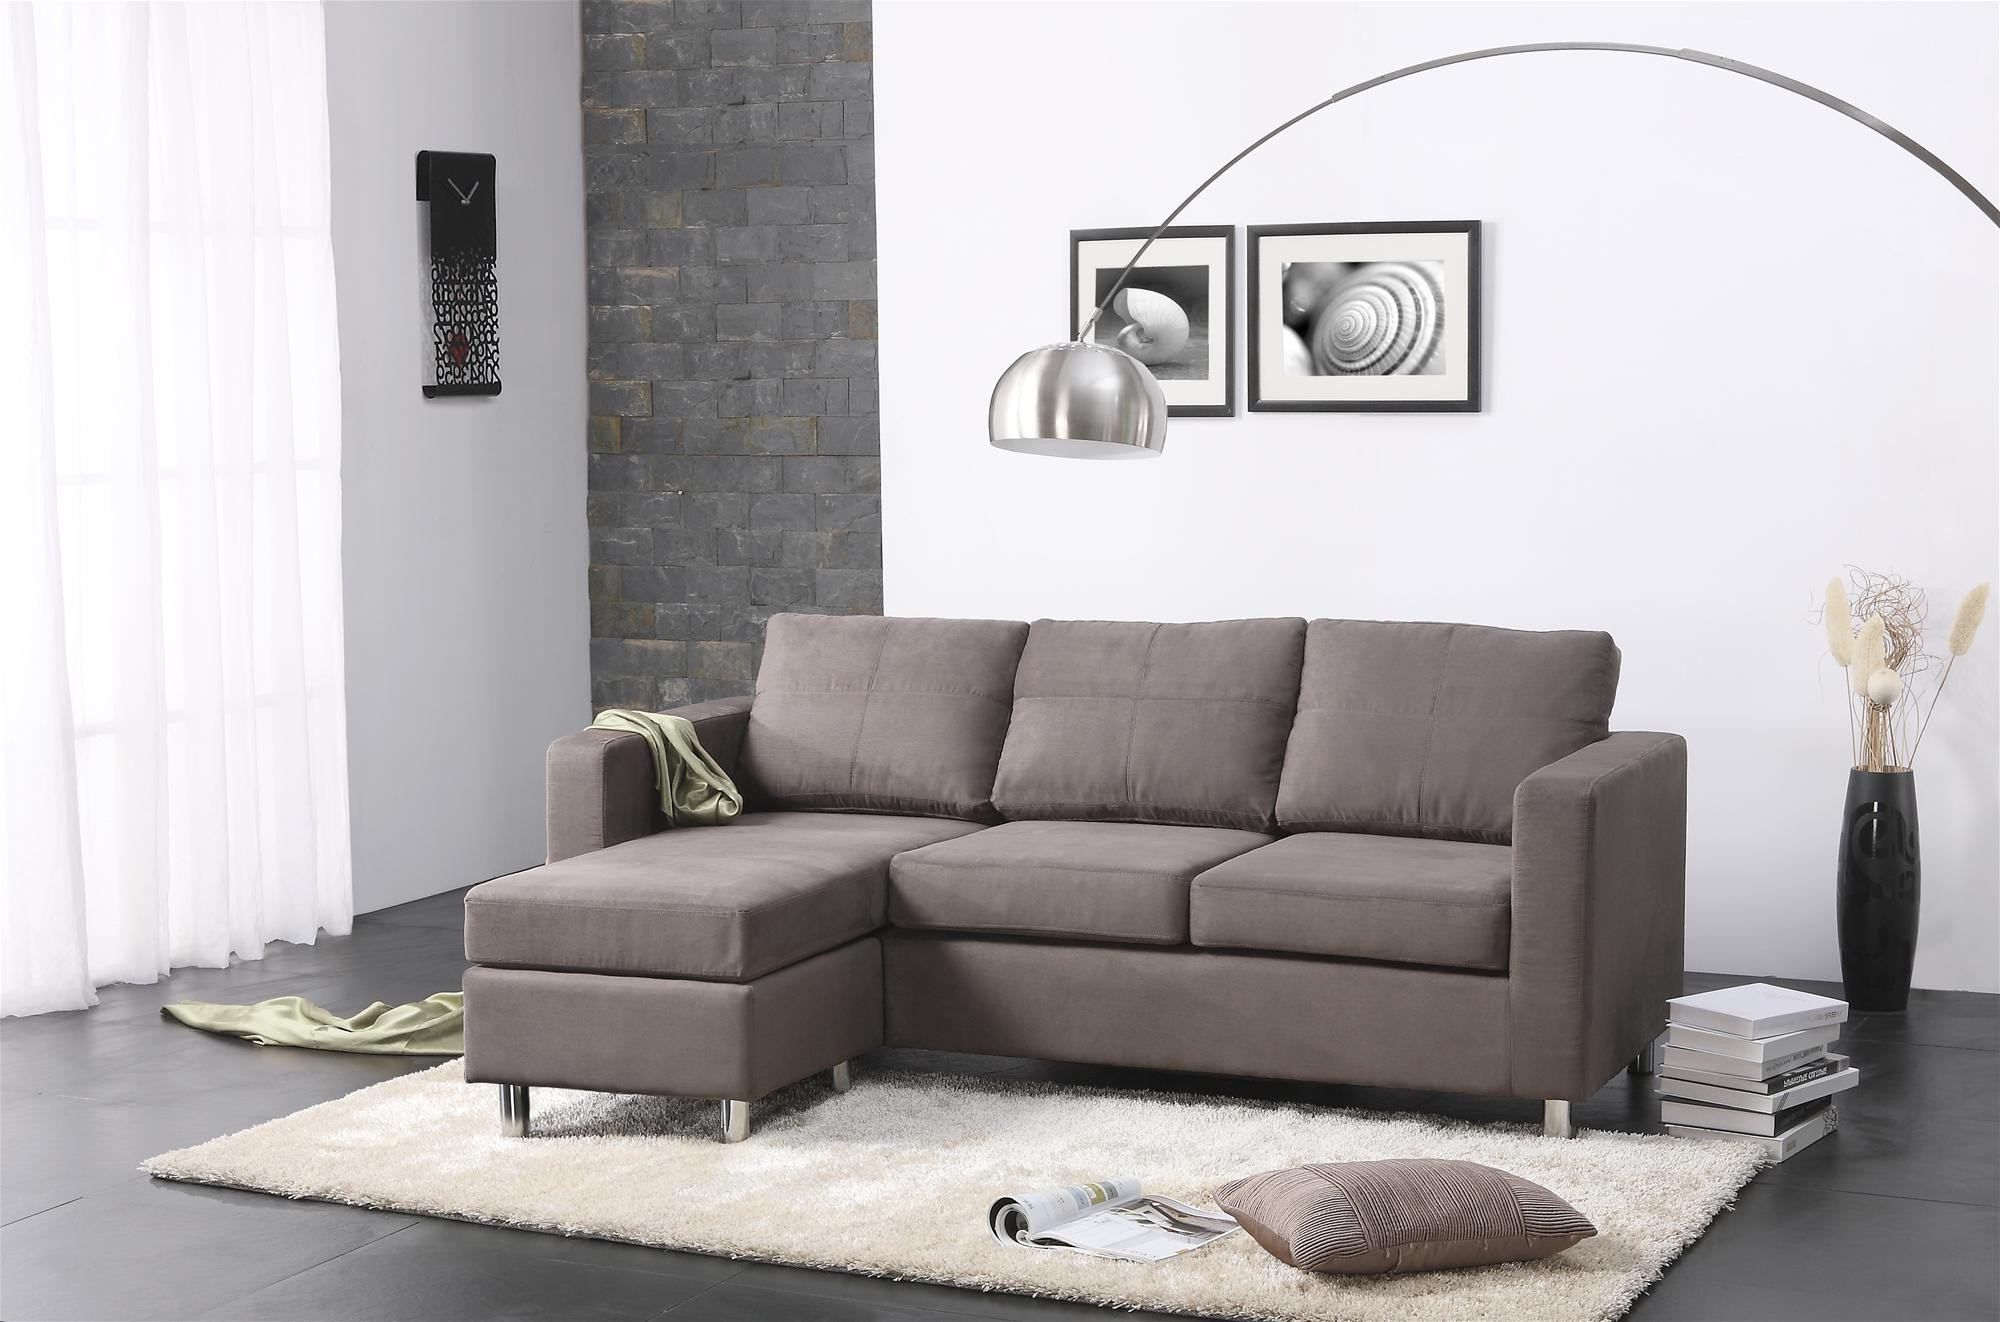 Sofa Style For Small Living Room